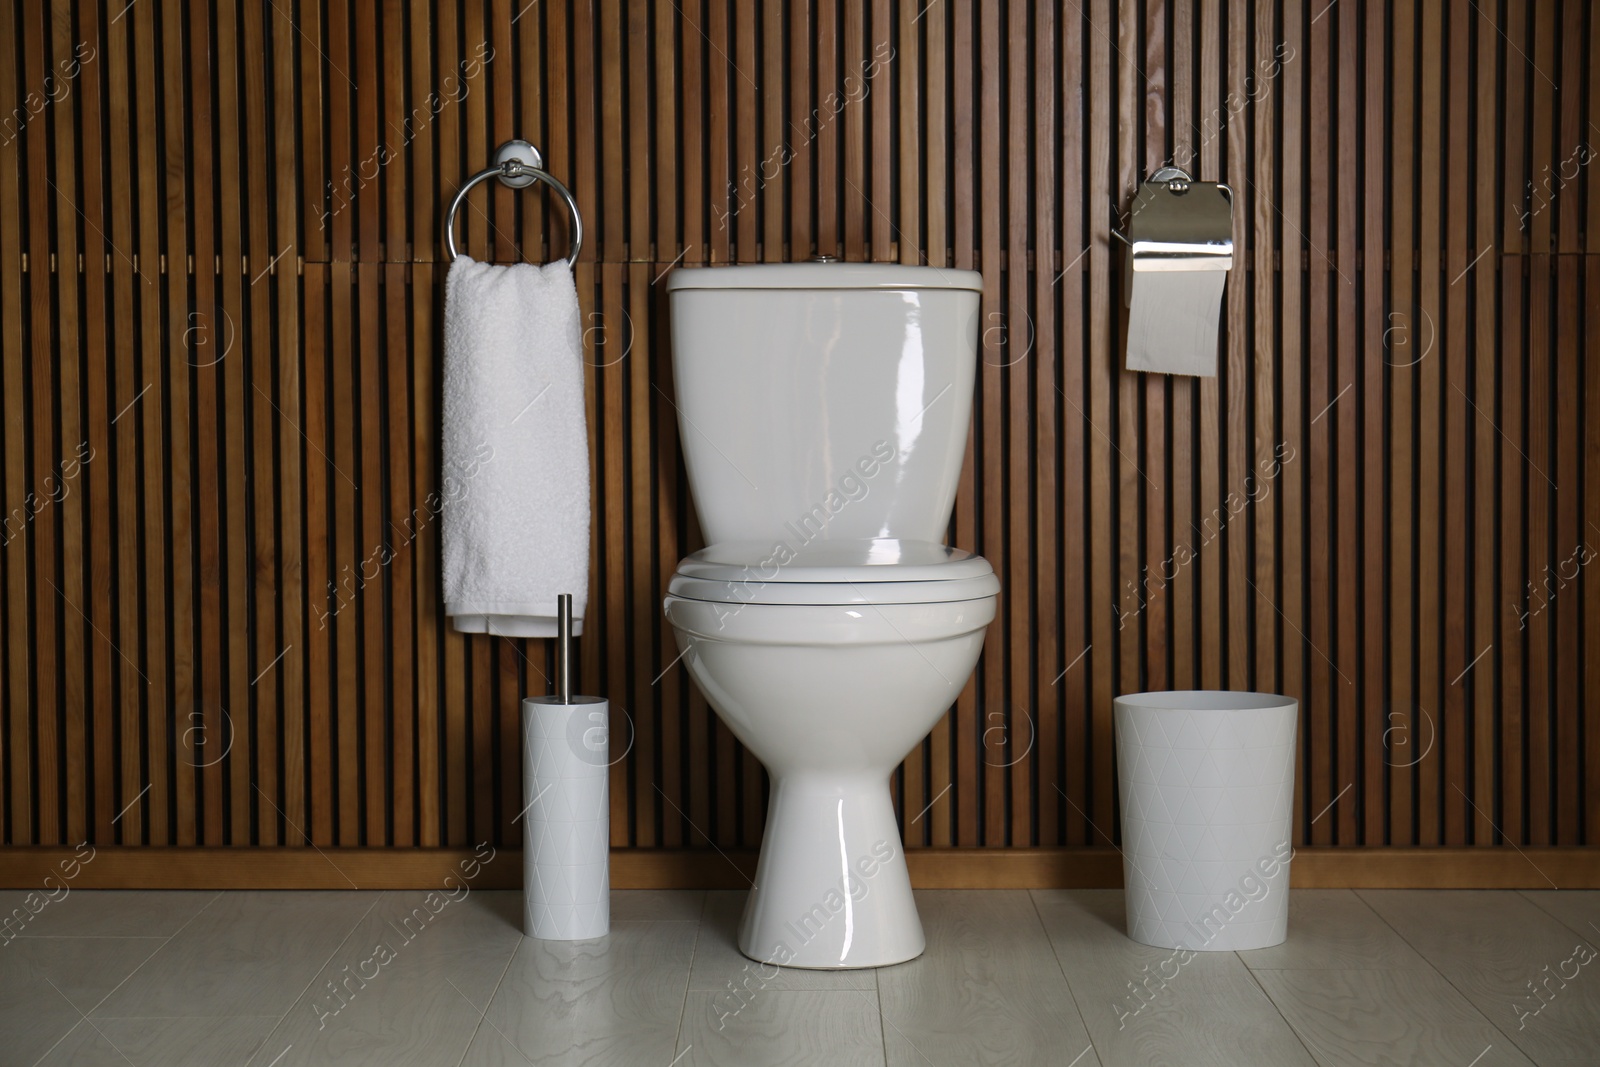 Photo of Simple bathroom interior with new toilet bowl near wooden wall